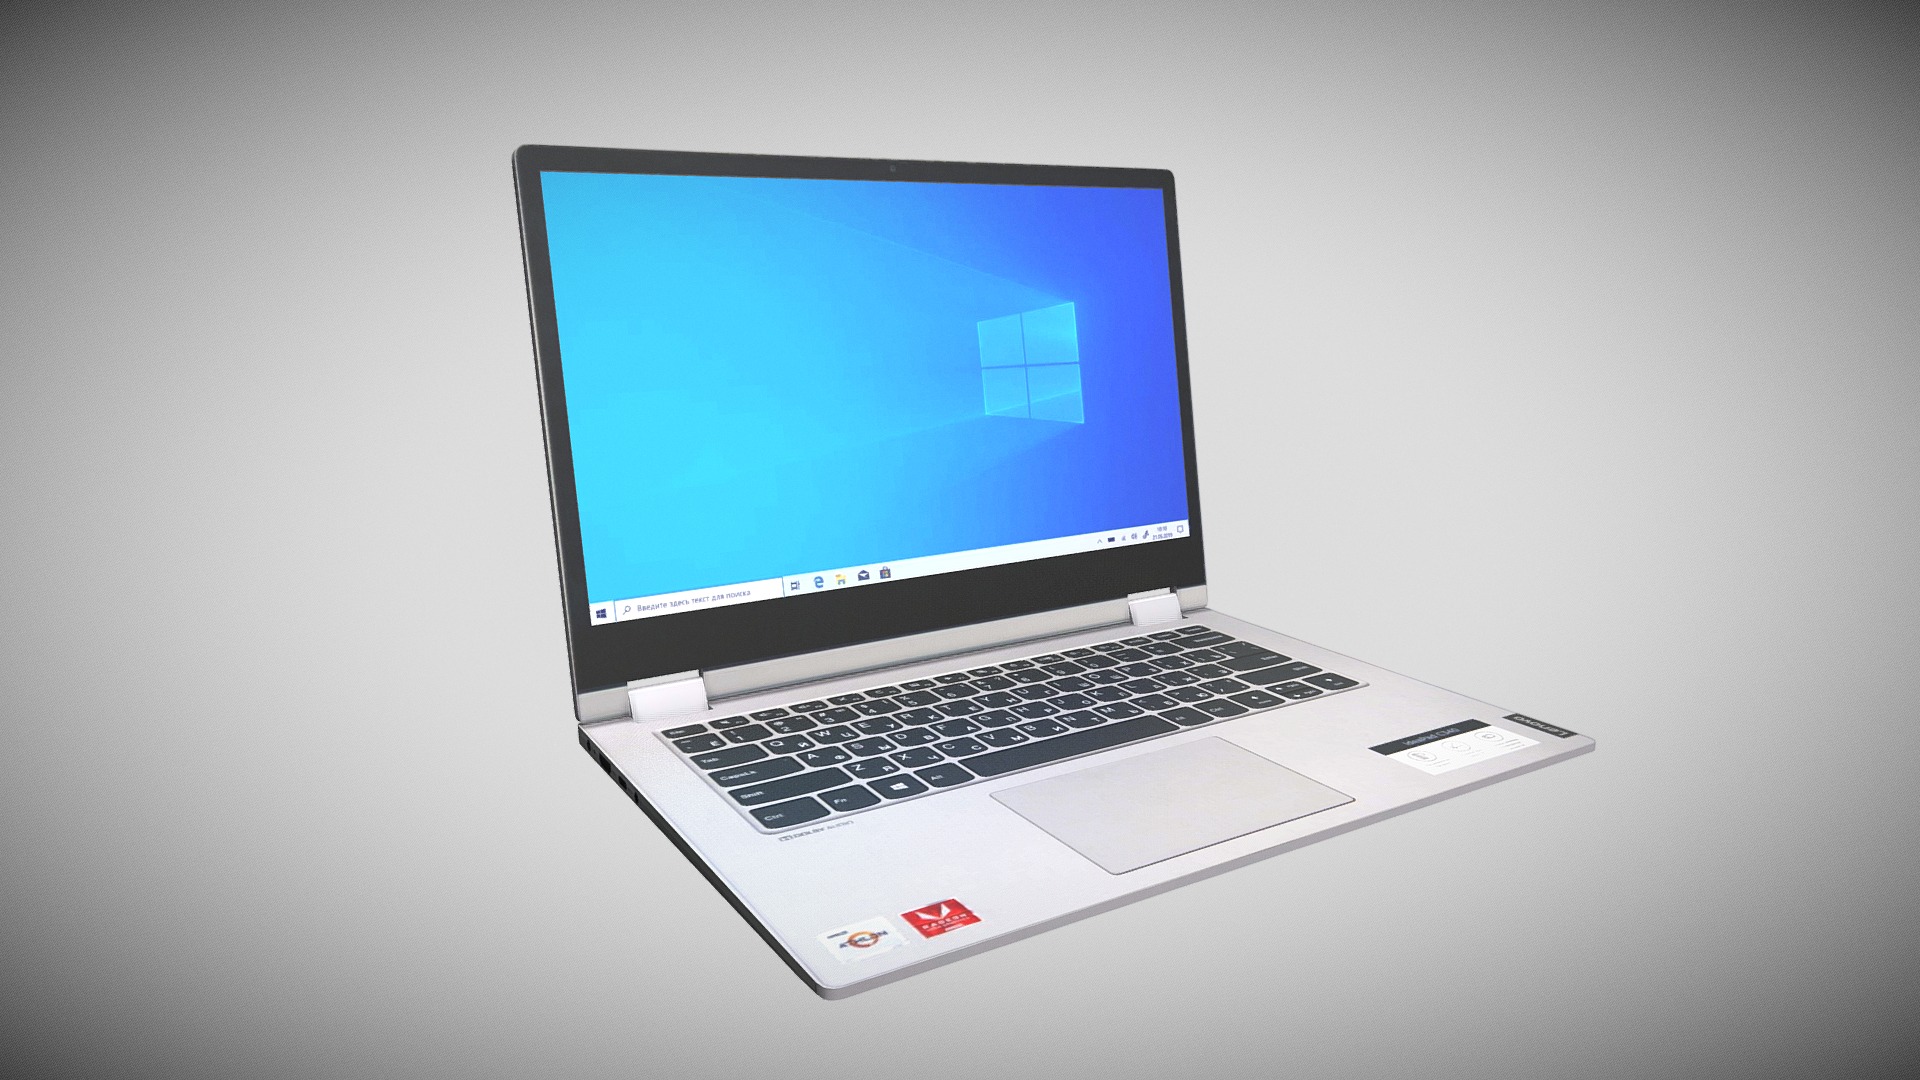 3D model lenovo ideapad c340 - This is a 3D model of the lenovo ideapad c340. The 3D model is about a laptop with a blue screen.